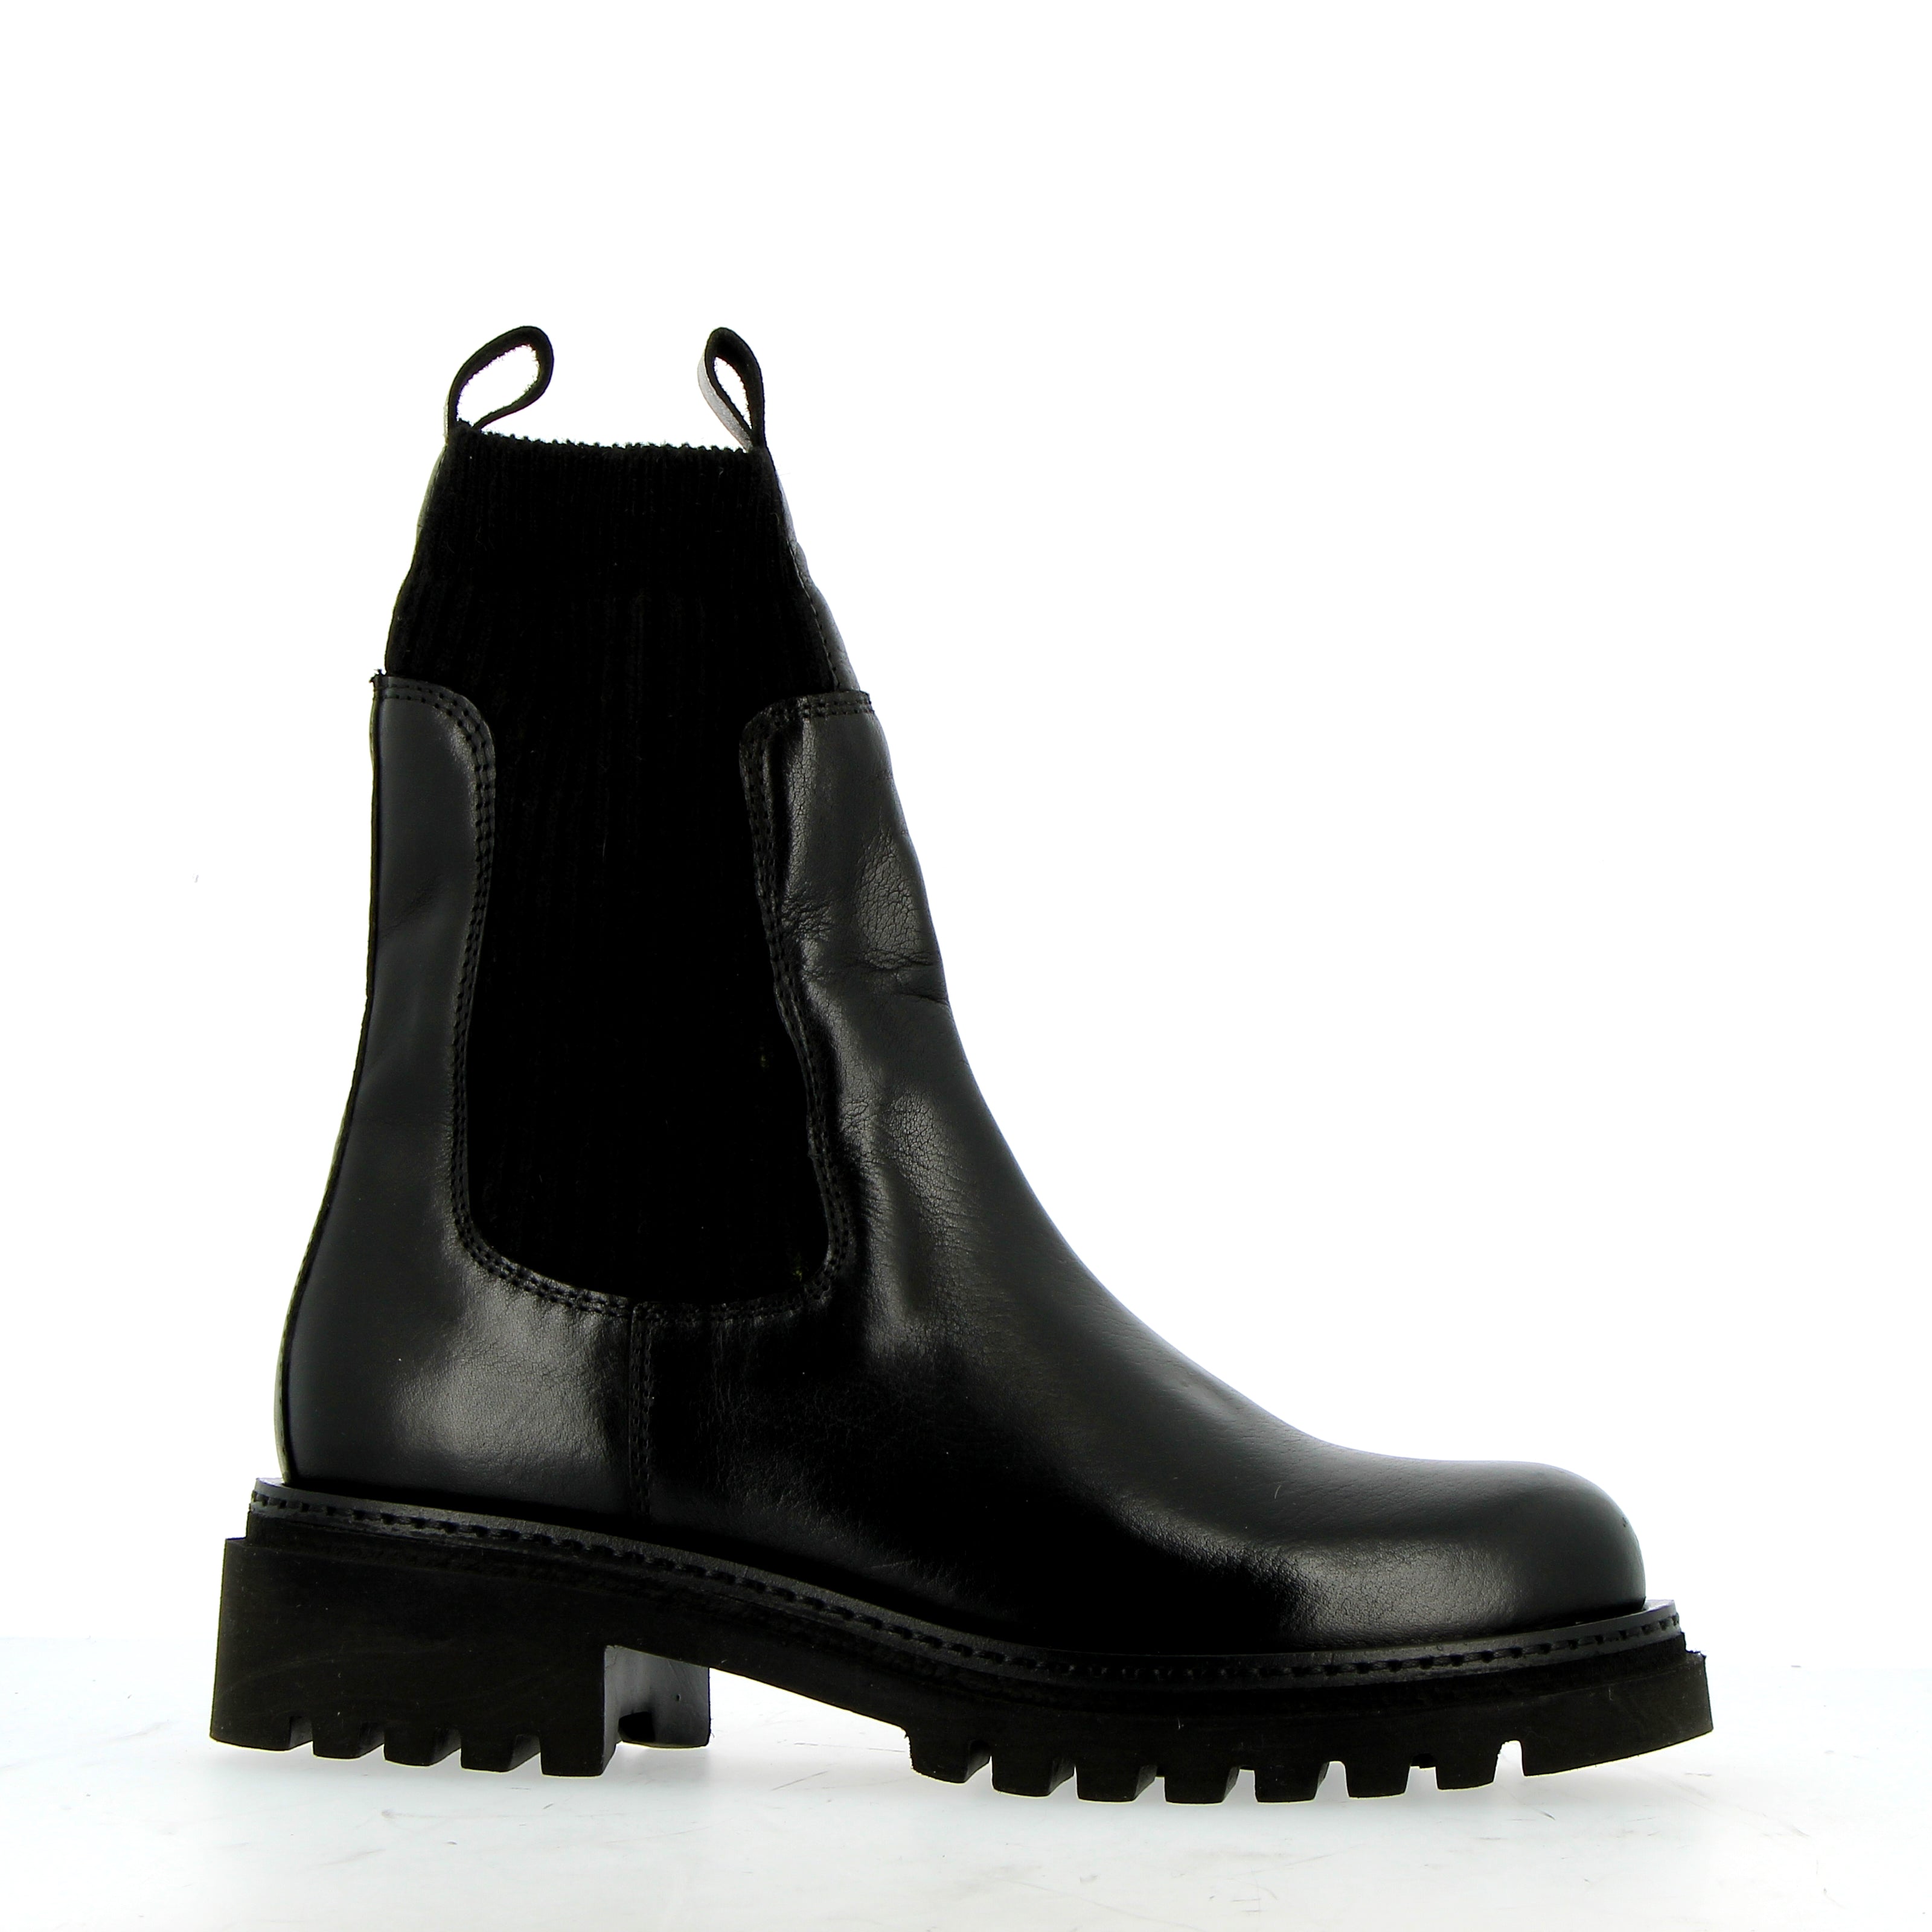 Black soft leather chelsea boot